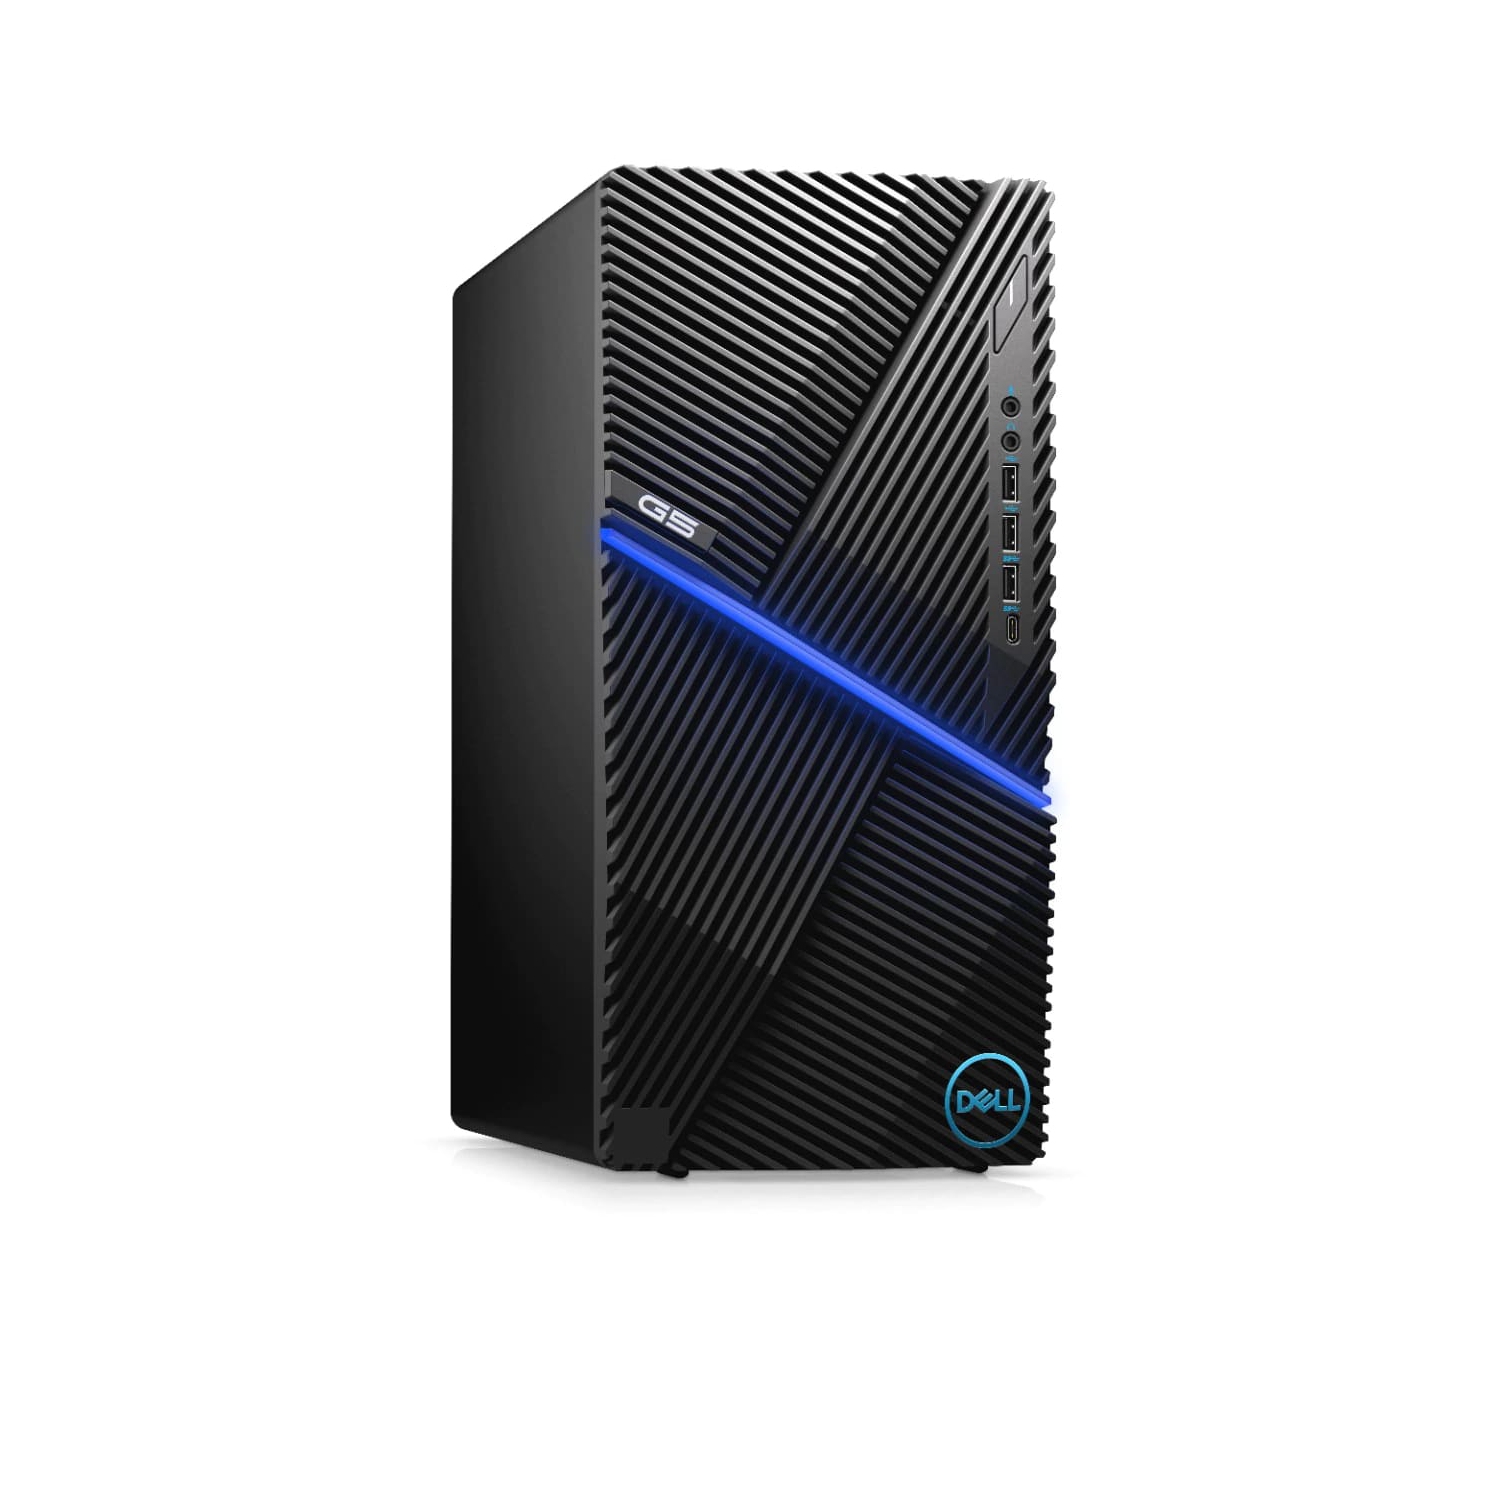 Refurbished (Excellent) - Dell G5 5000 Gaming Desktop (2020), Core i7 - 2TB HDD + 1TB SSD - 32GB RAM - 2070 Super, 8 Cores @ 5.1 GHz - 10th Gen CPU Certified Refurbished